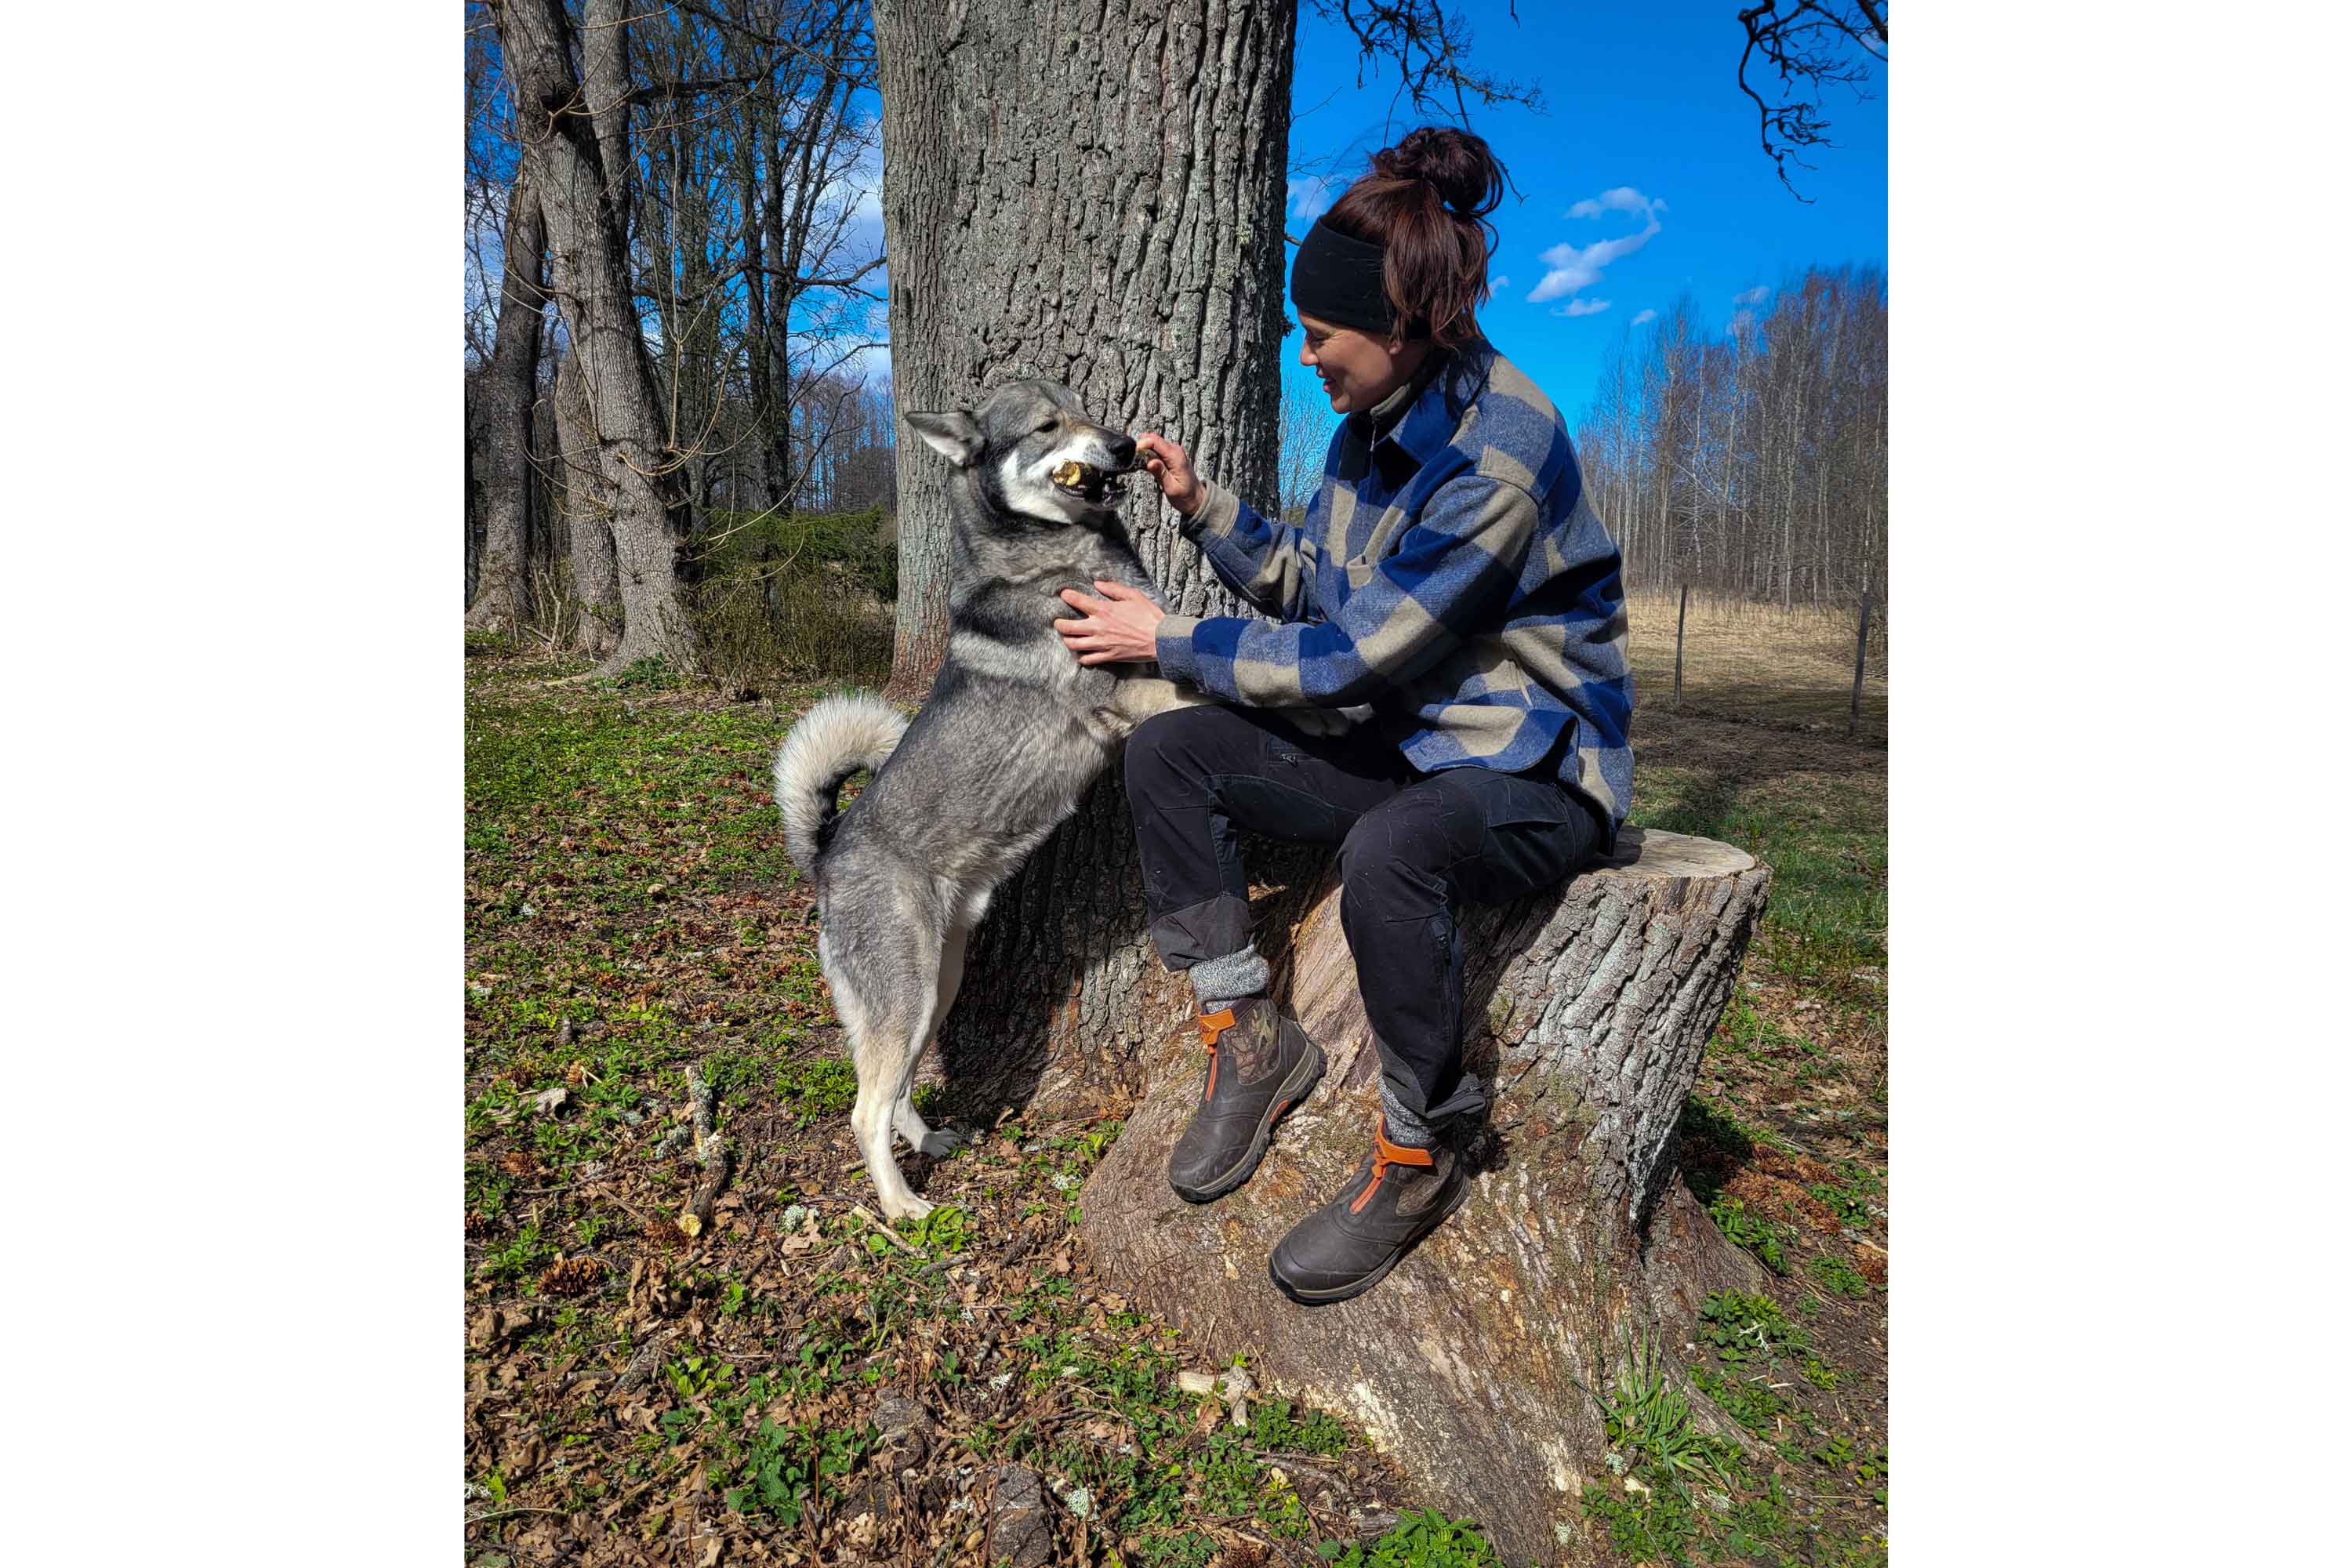 Nathalie Larsson sat on a tree stump, wearing cold weather clothing and a pair of Muck Boots. She's giving a bone to her dog